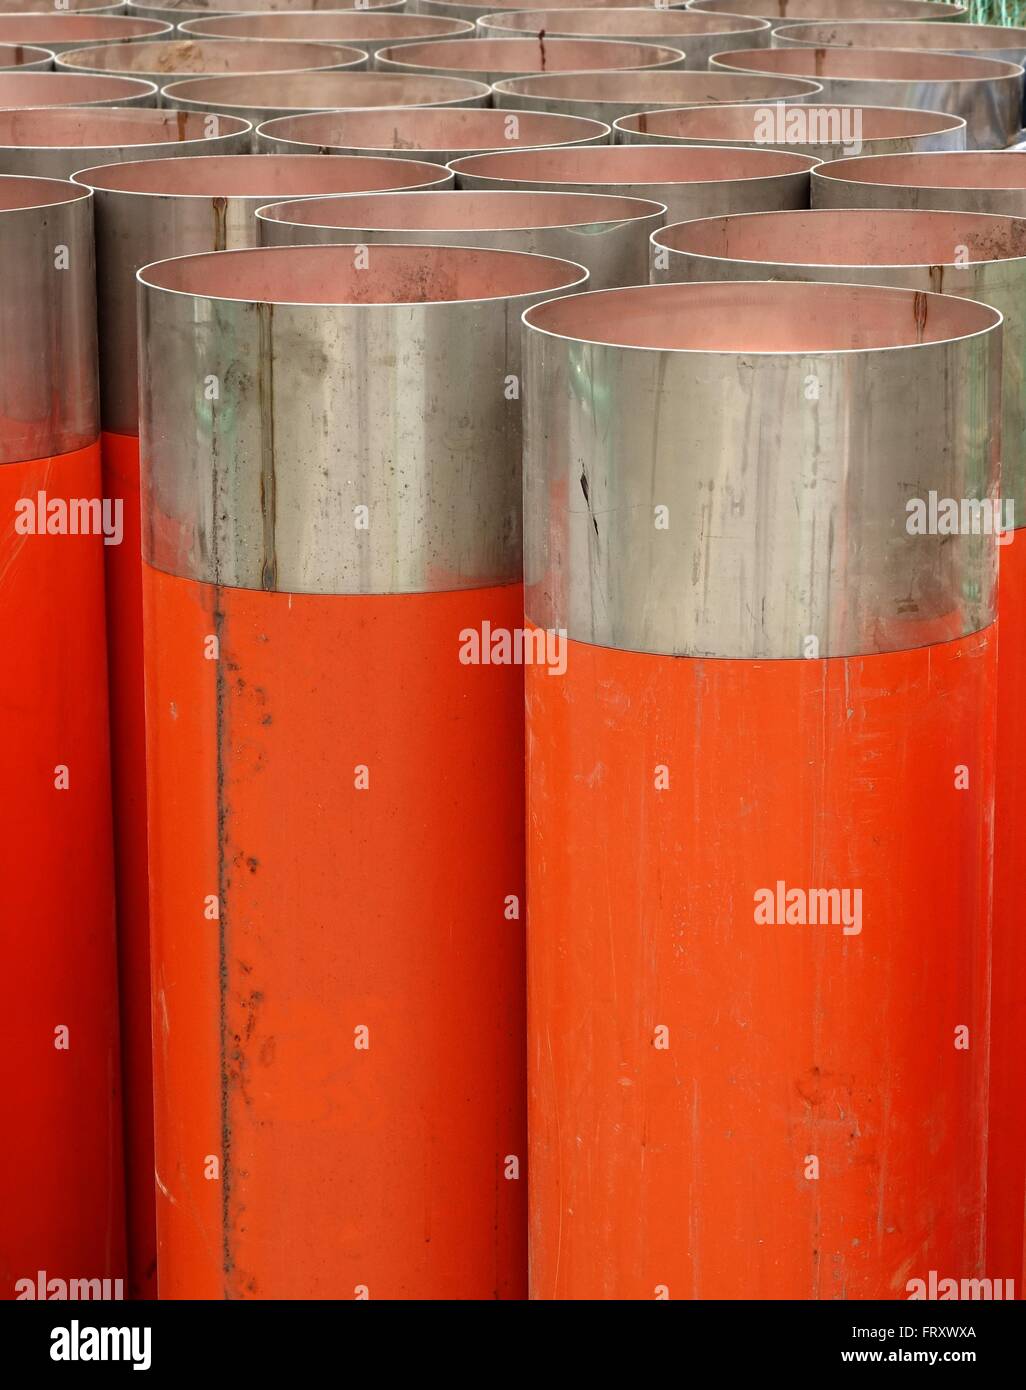 Large orange PVC pipes with stainless steel metal caps Stock Photo